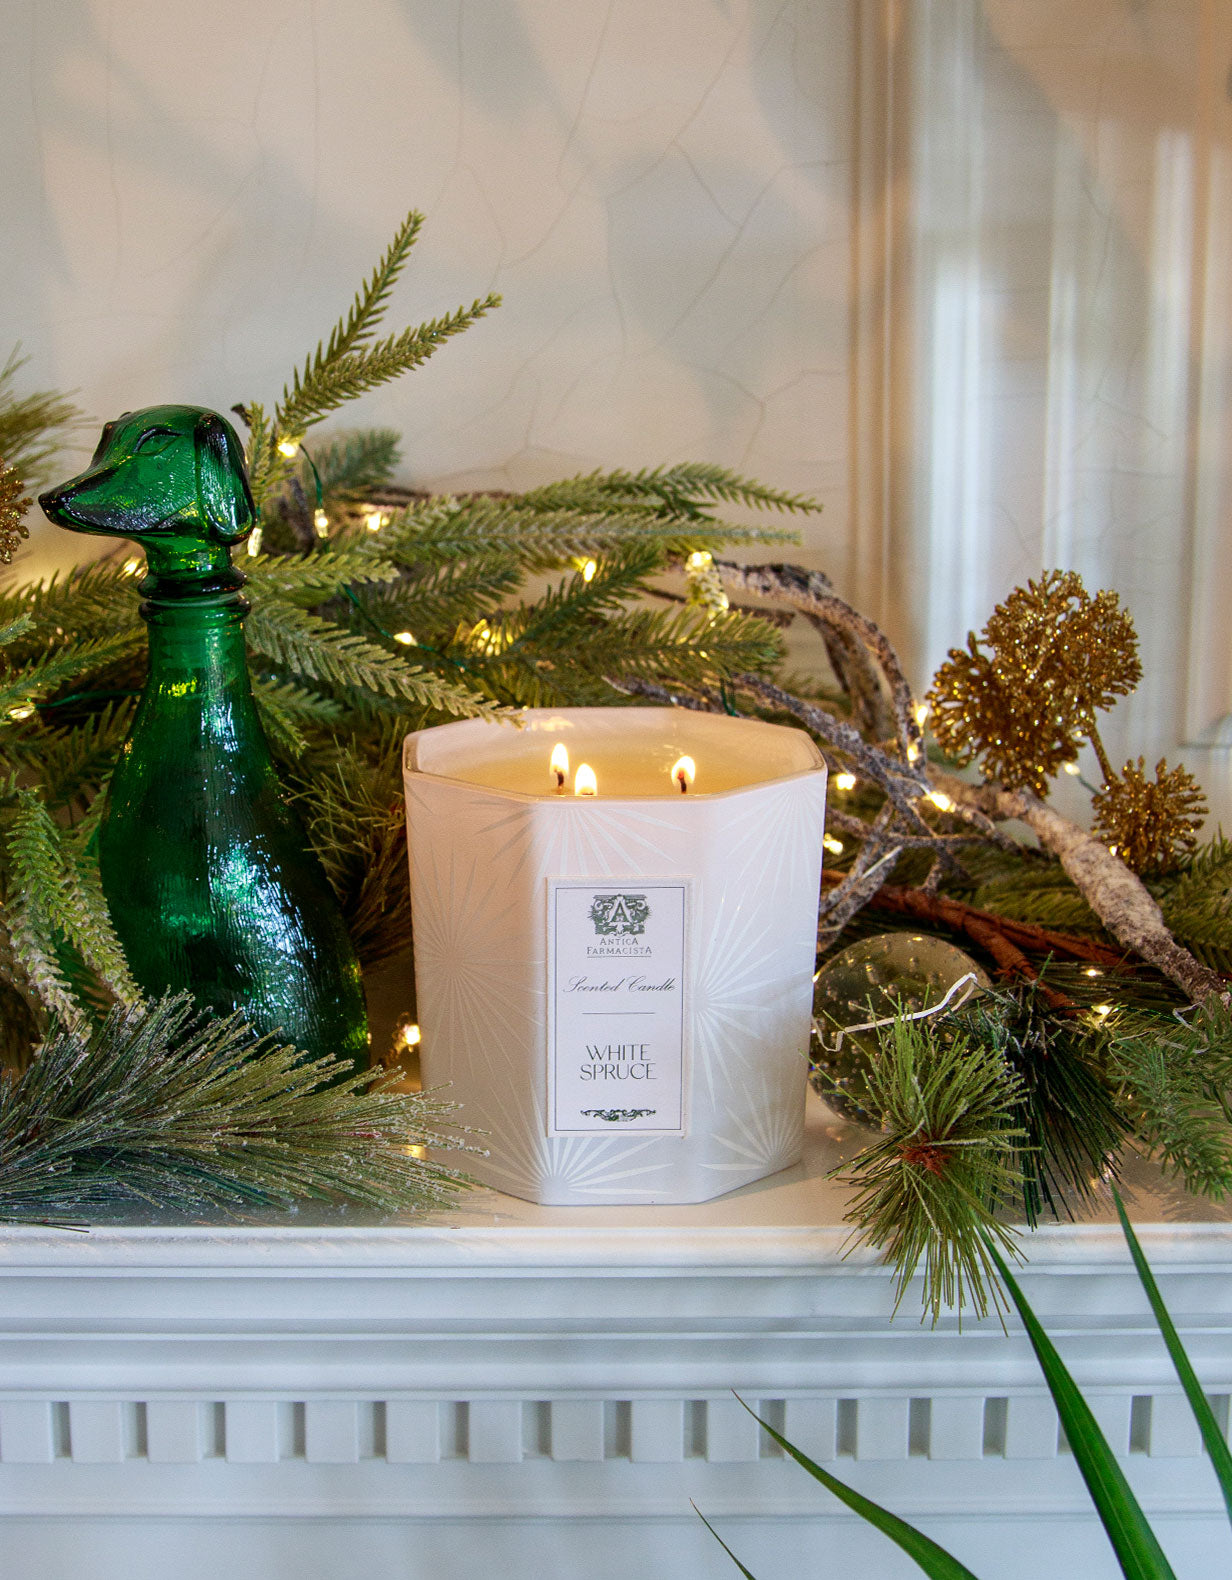 White Spruce Three-Wick Candle